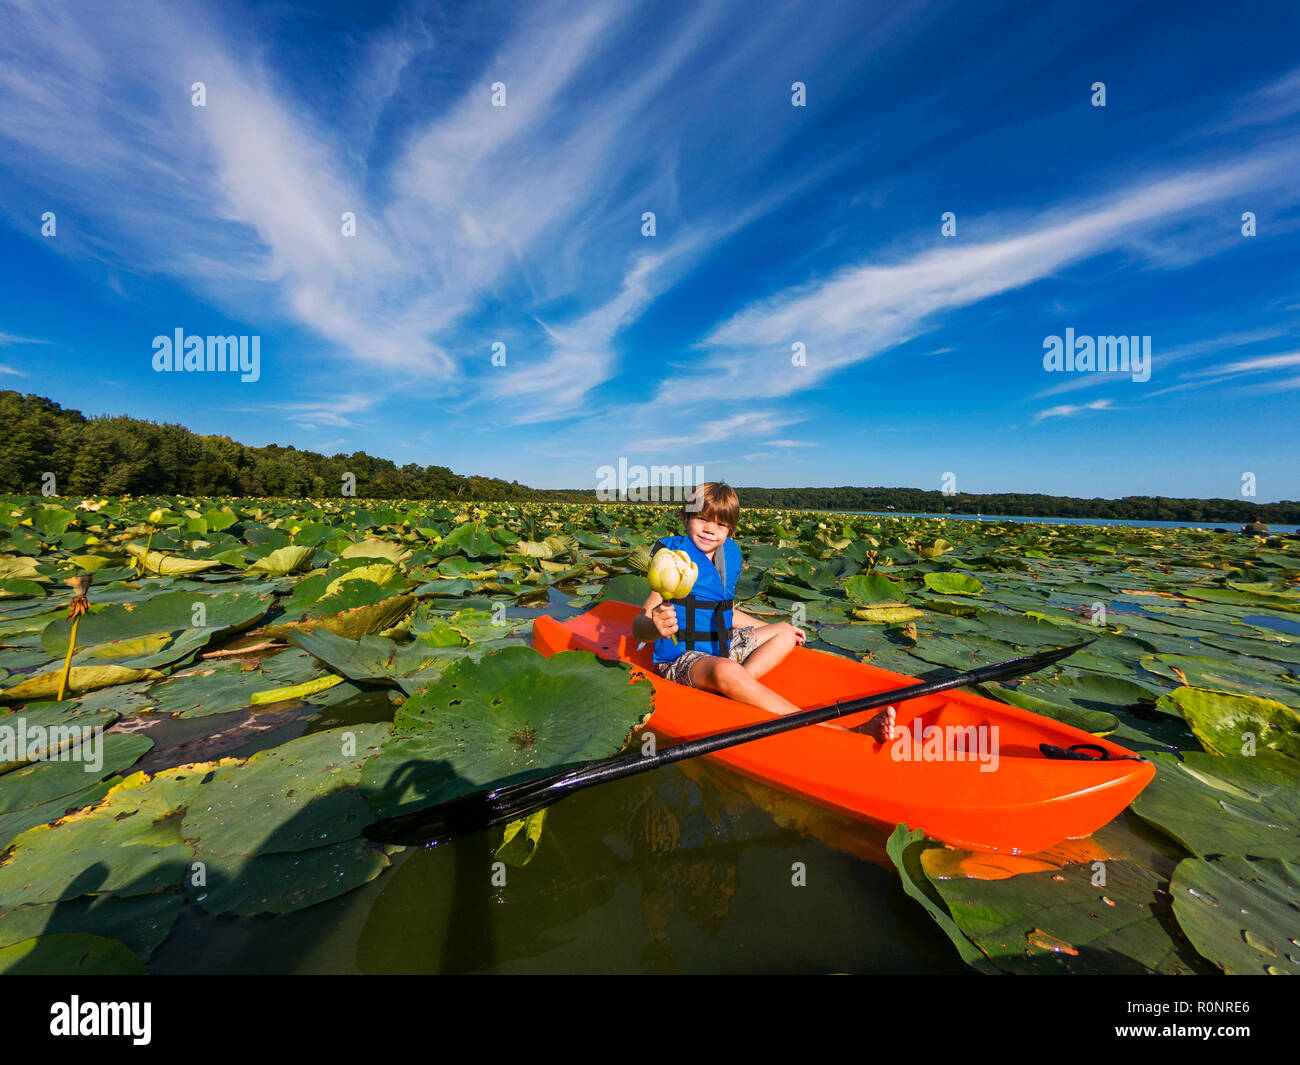 Boy sitting in a kayak holding a flower in a lake filled with water lilies, United States Stock Photo